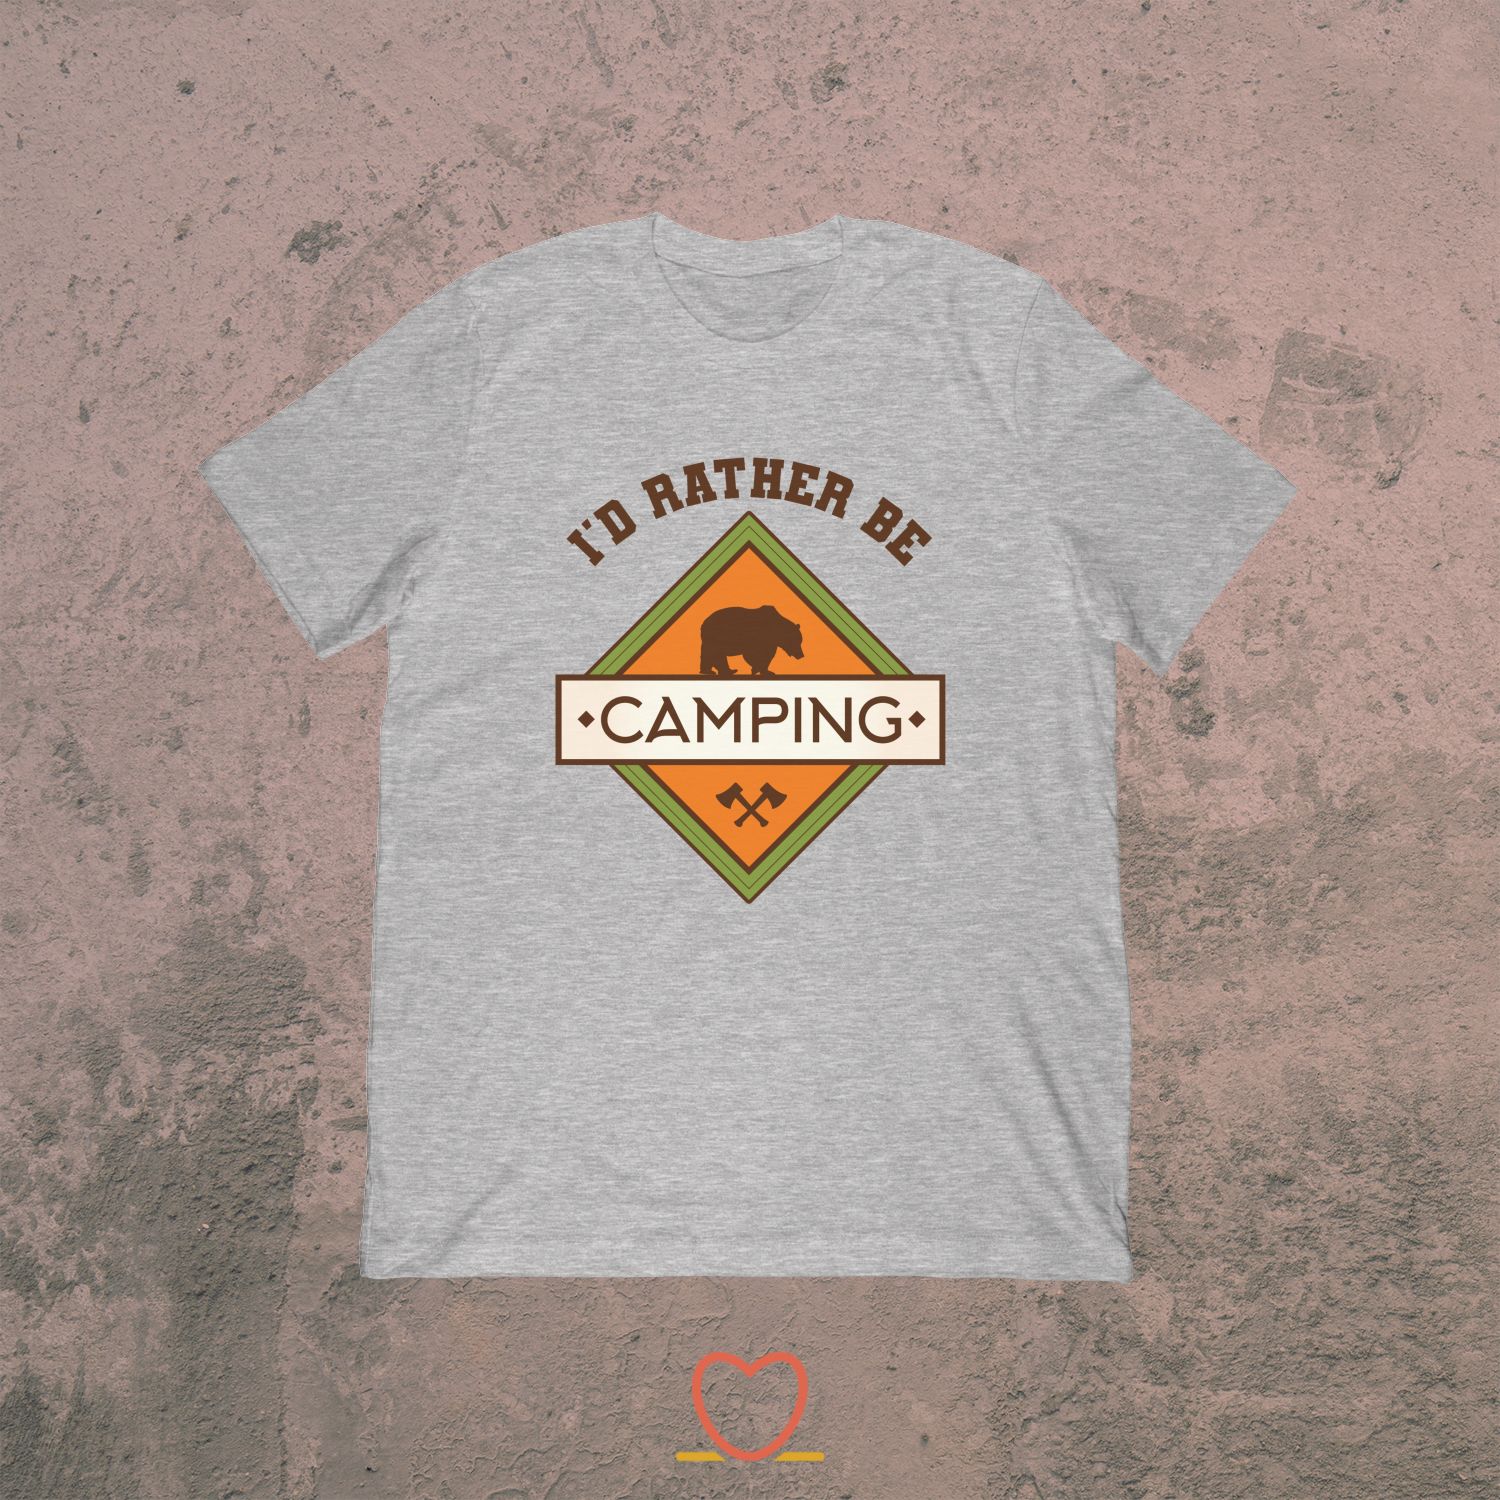 I’d Rather Be Camping – Camping Tee